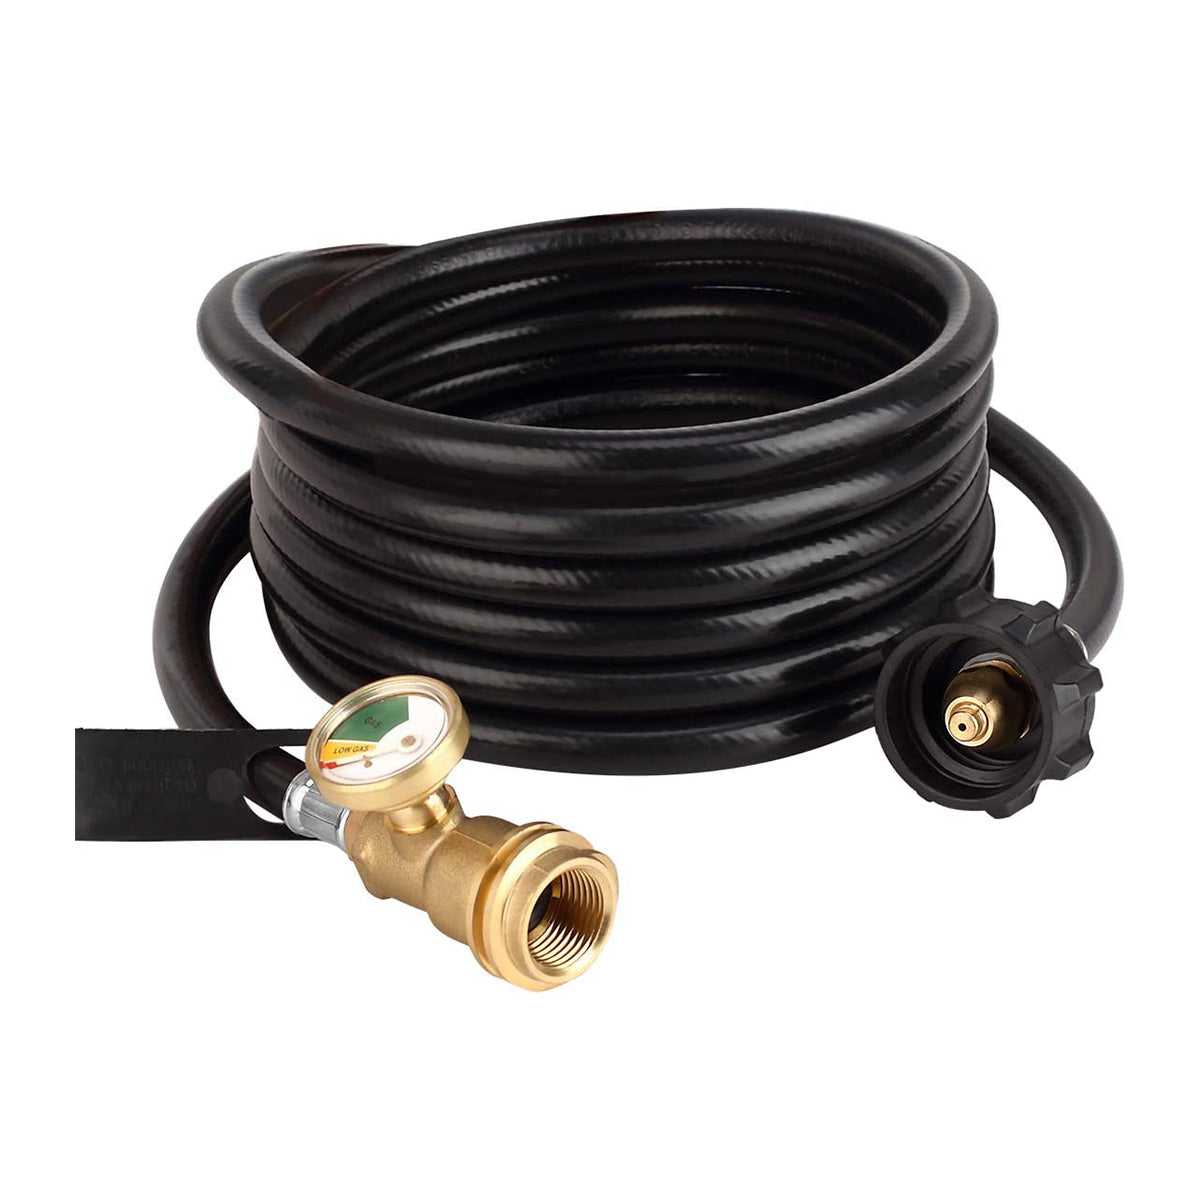 GASLAND Flexible Propane Gas Line, 12 Feet Natural Gas Grill Hose with 3/8  Male Flare Quick Connect/Disconnect Fittings, CSA Certified for Low  Pressure Outdoor NG/Propane Appliance